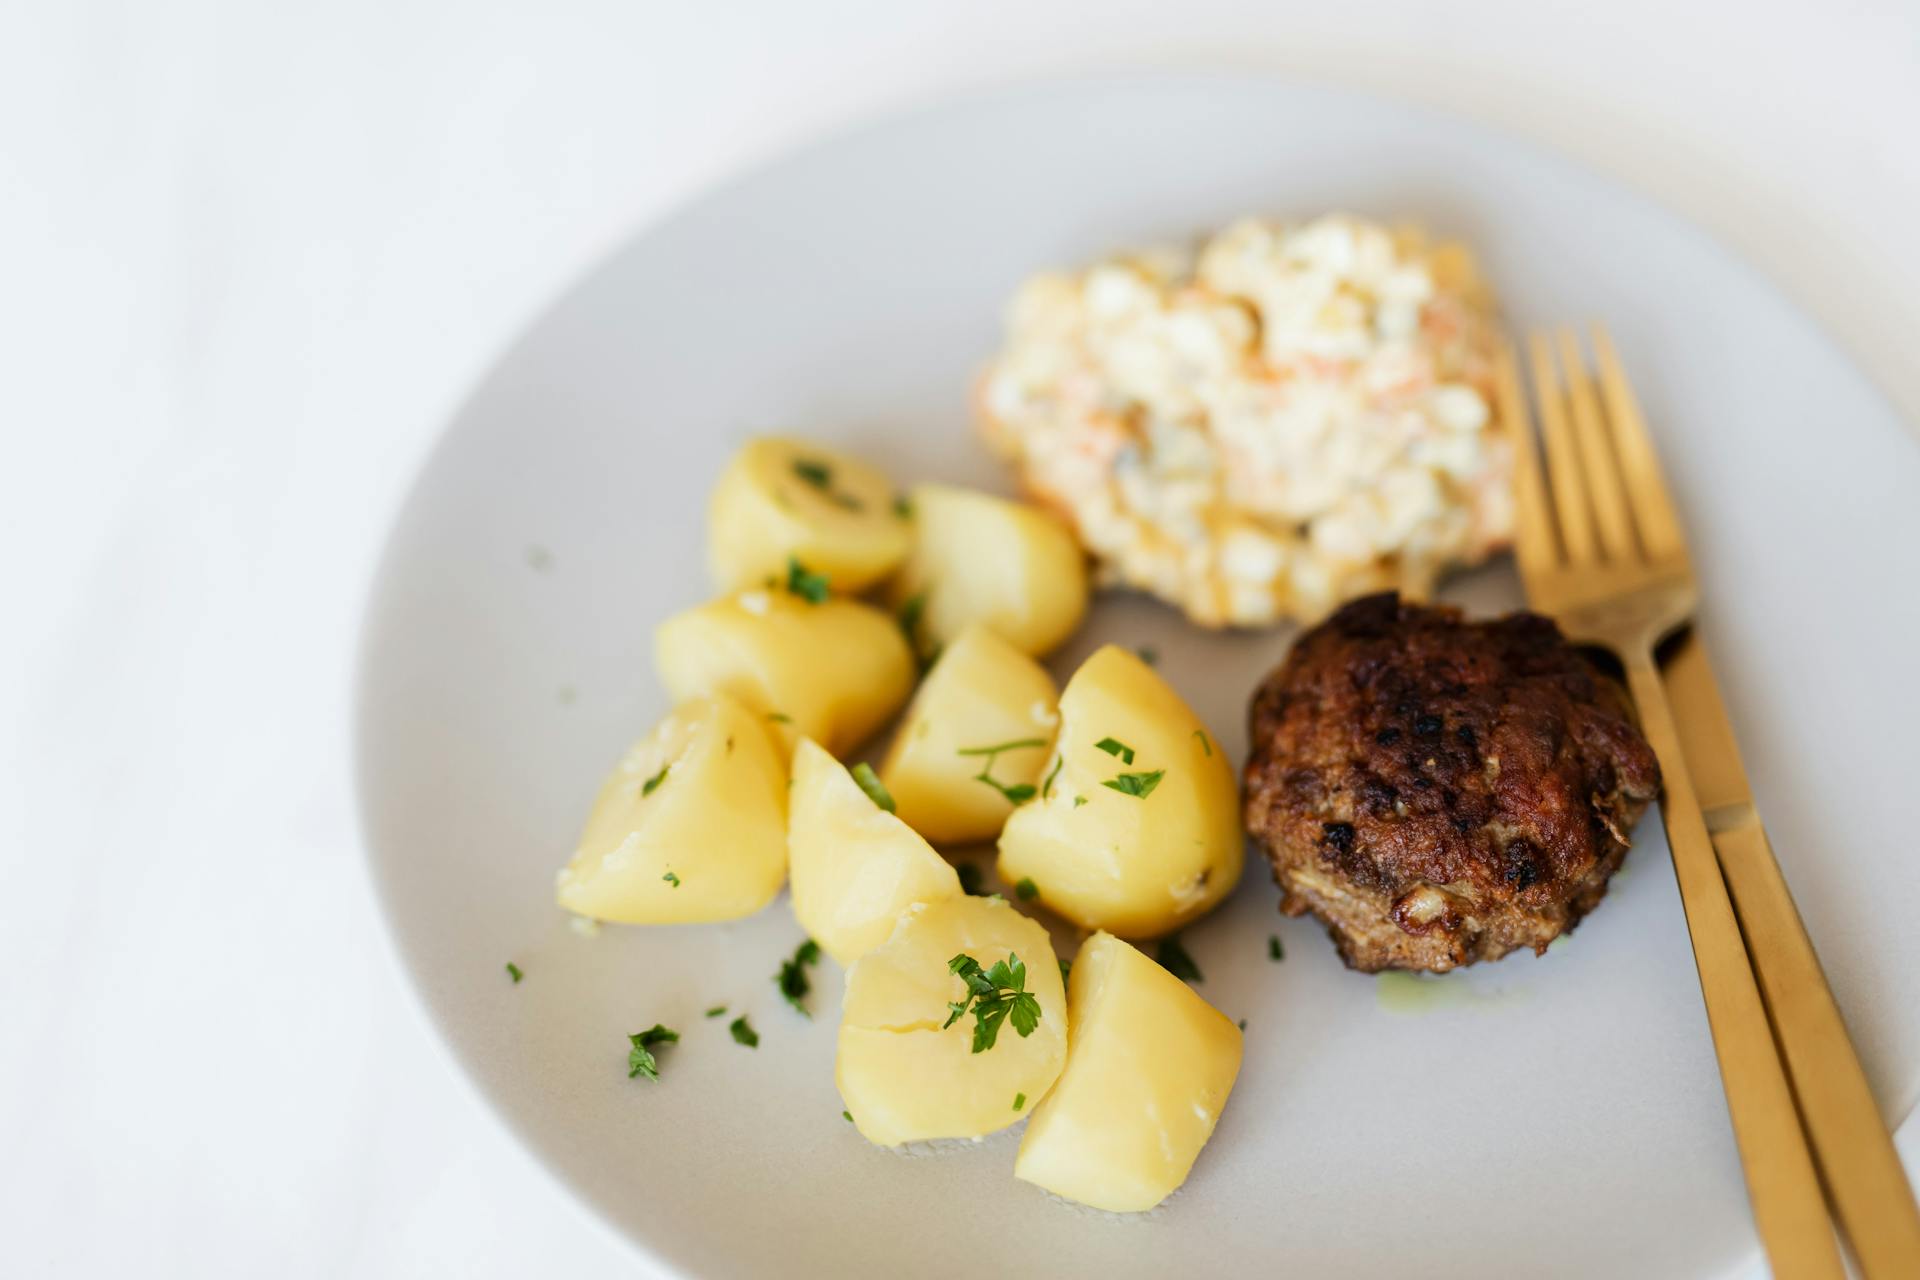 Fried meat cutlet served with boiled potatoes and salad